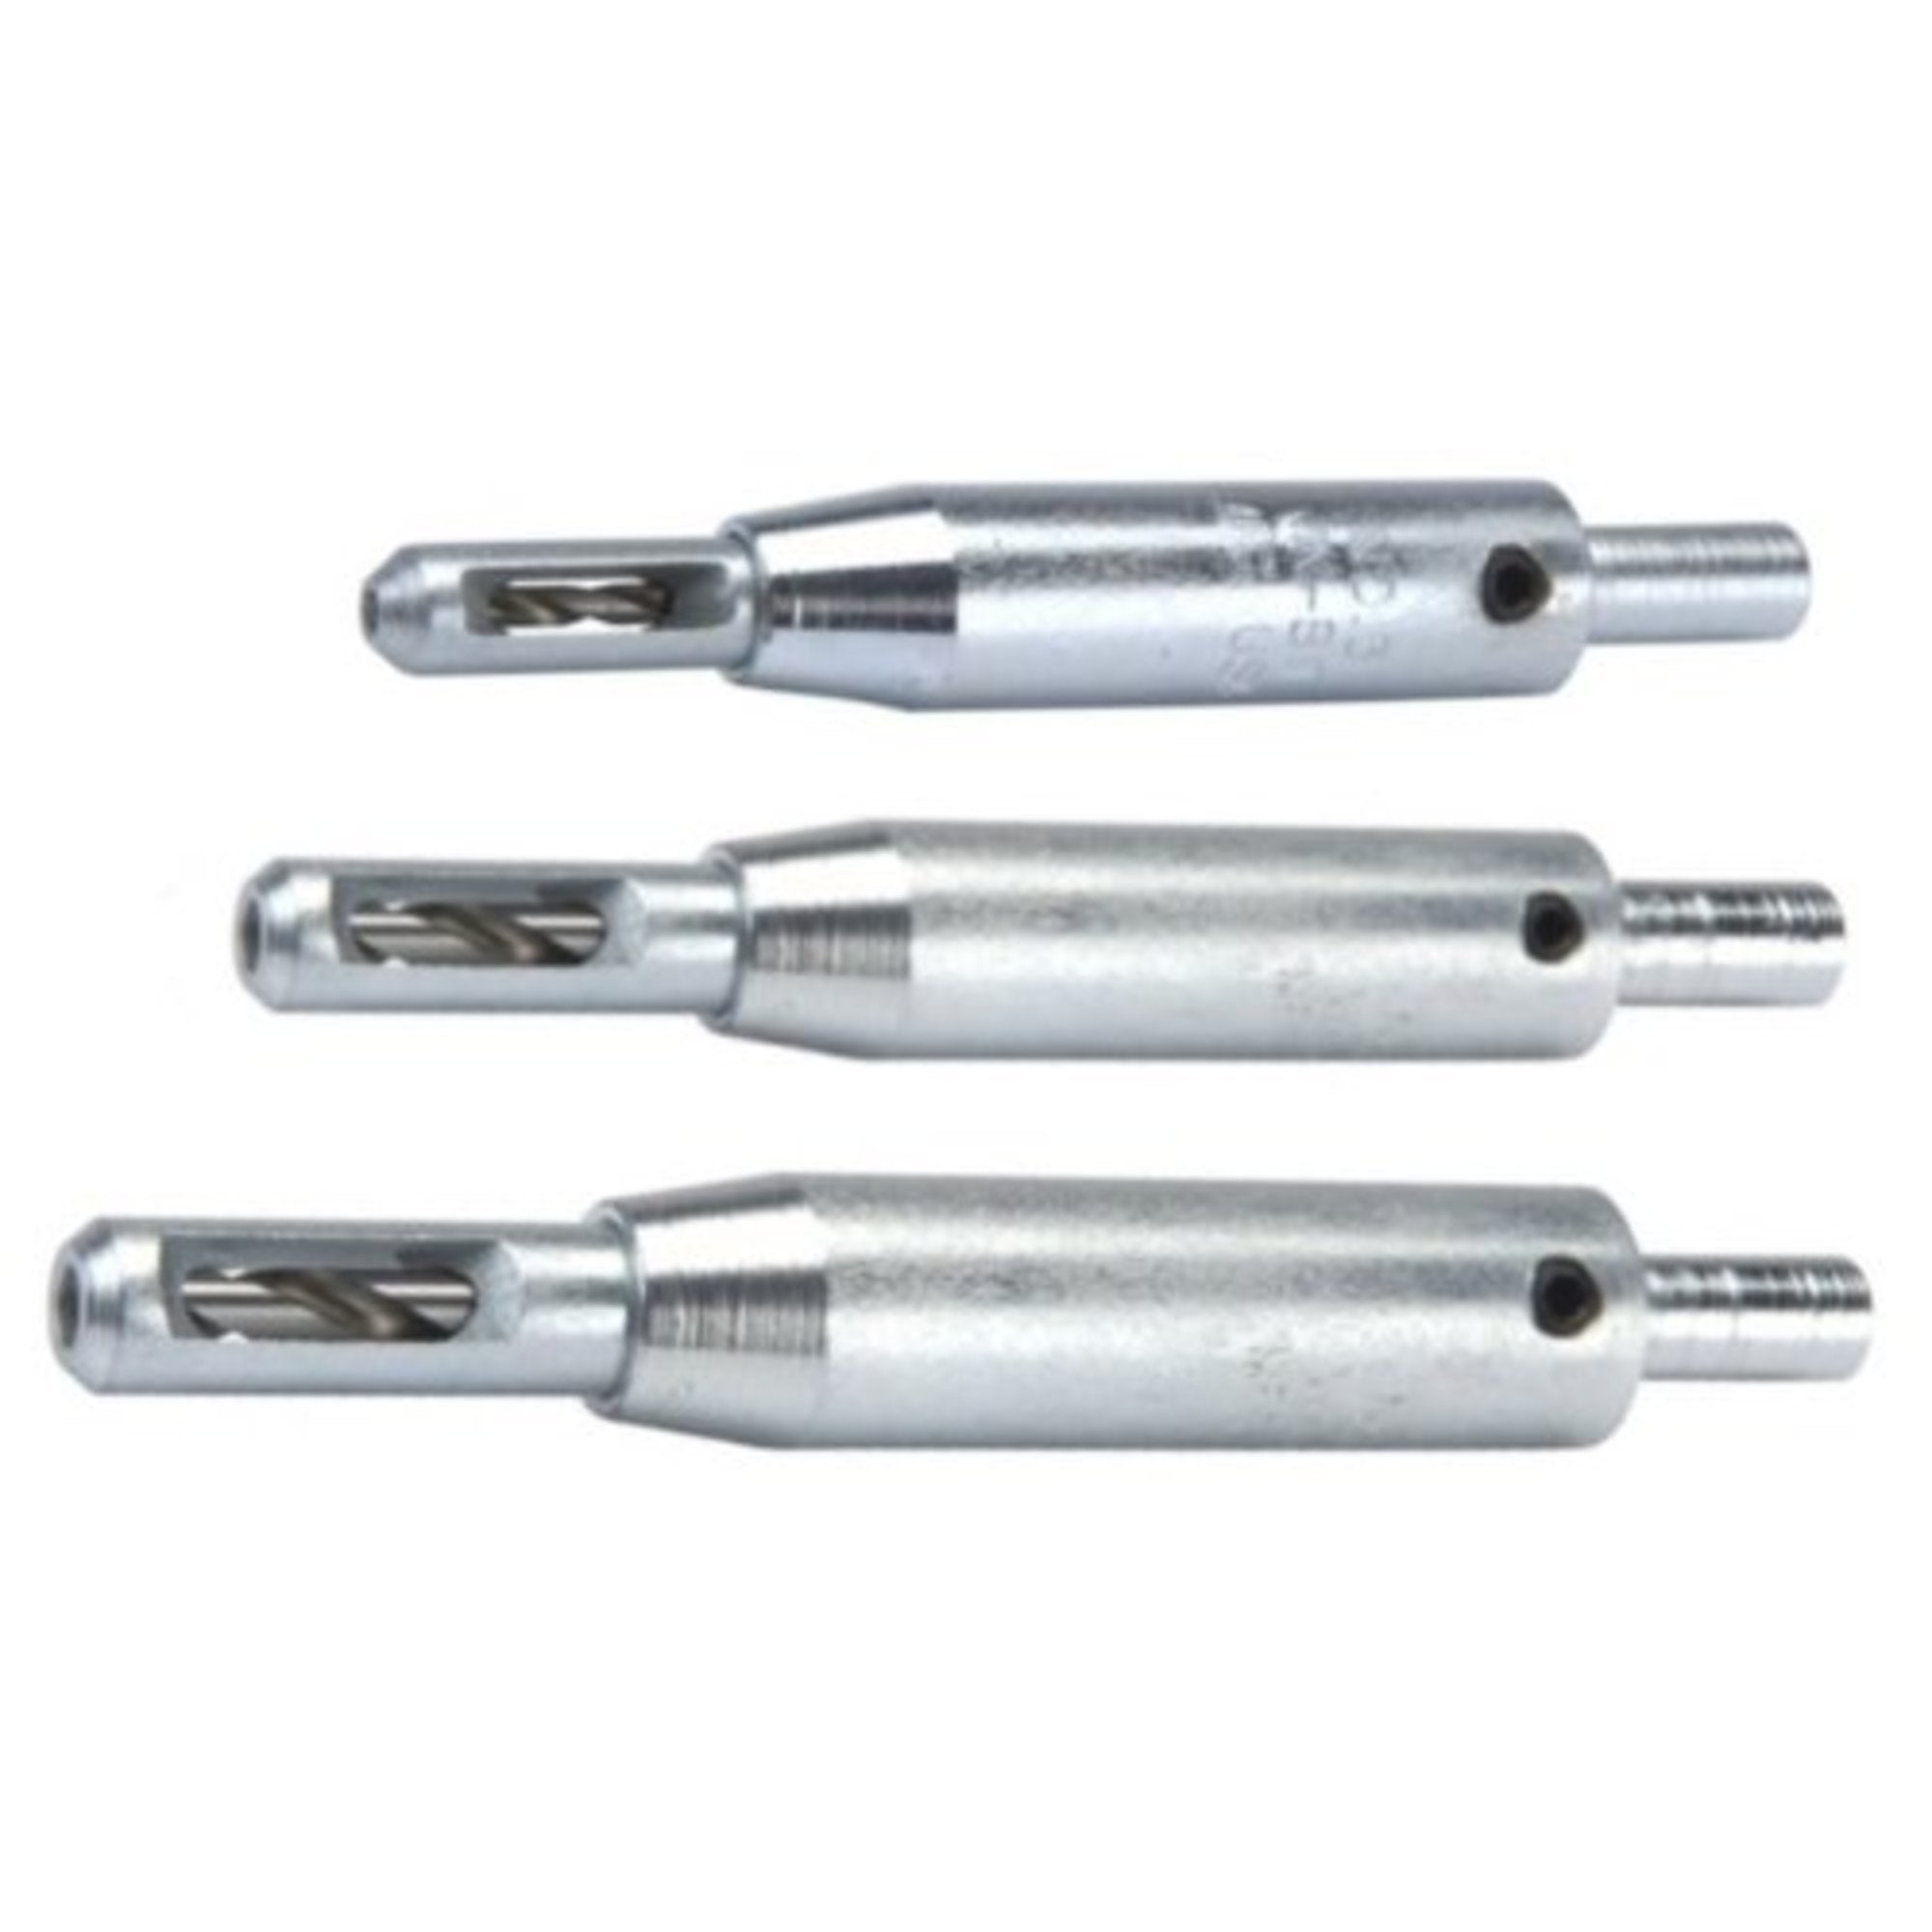 Shop for S.E. Vick Tool Co. at Prime Tools: Drill Bits and Drivers